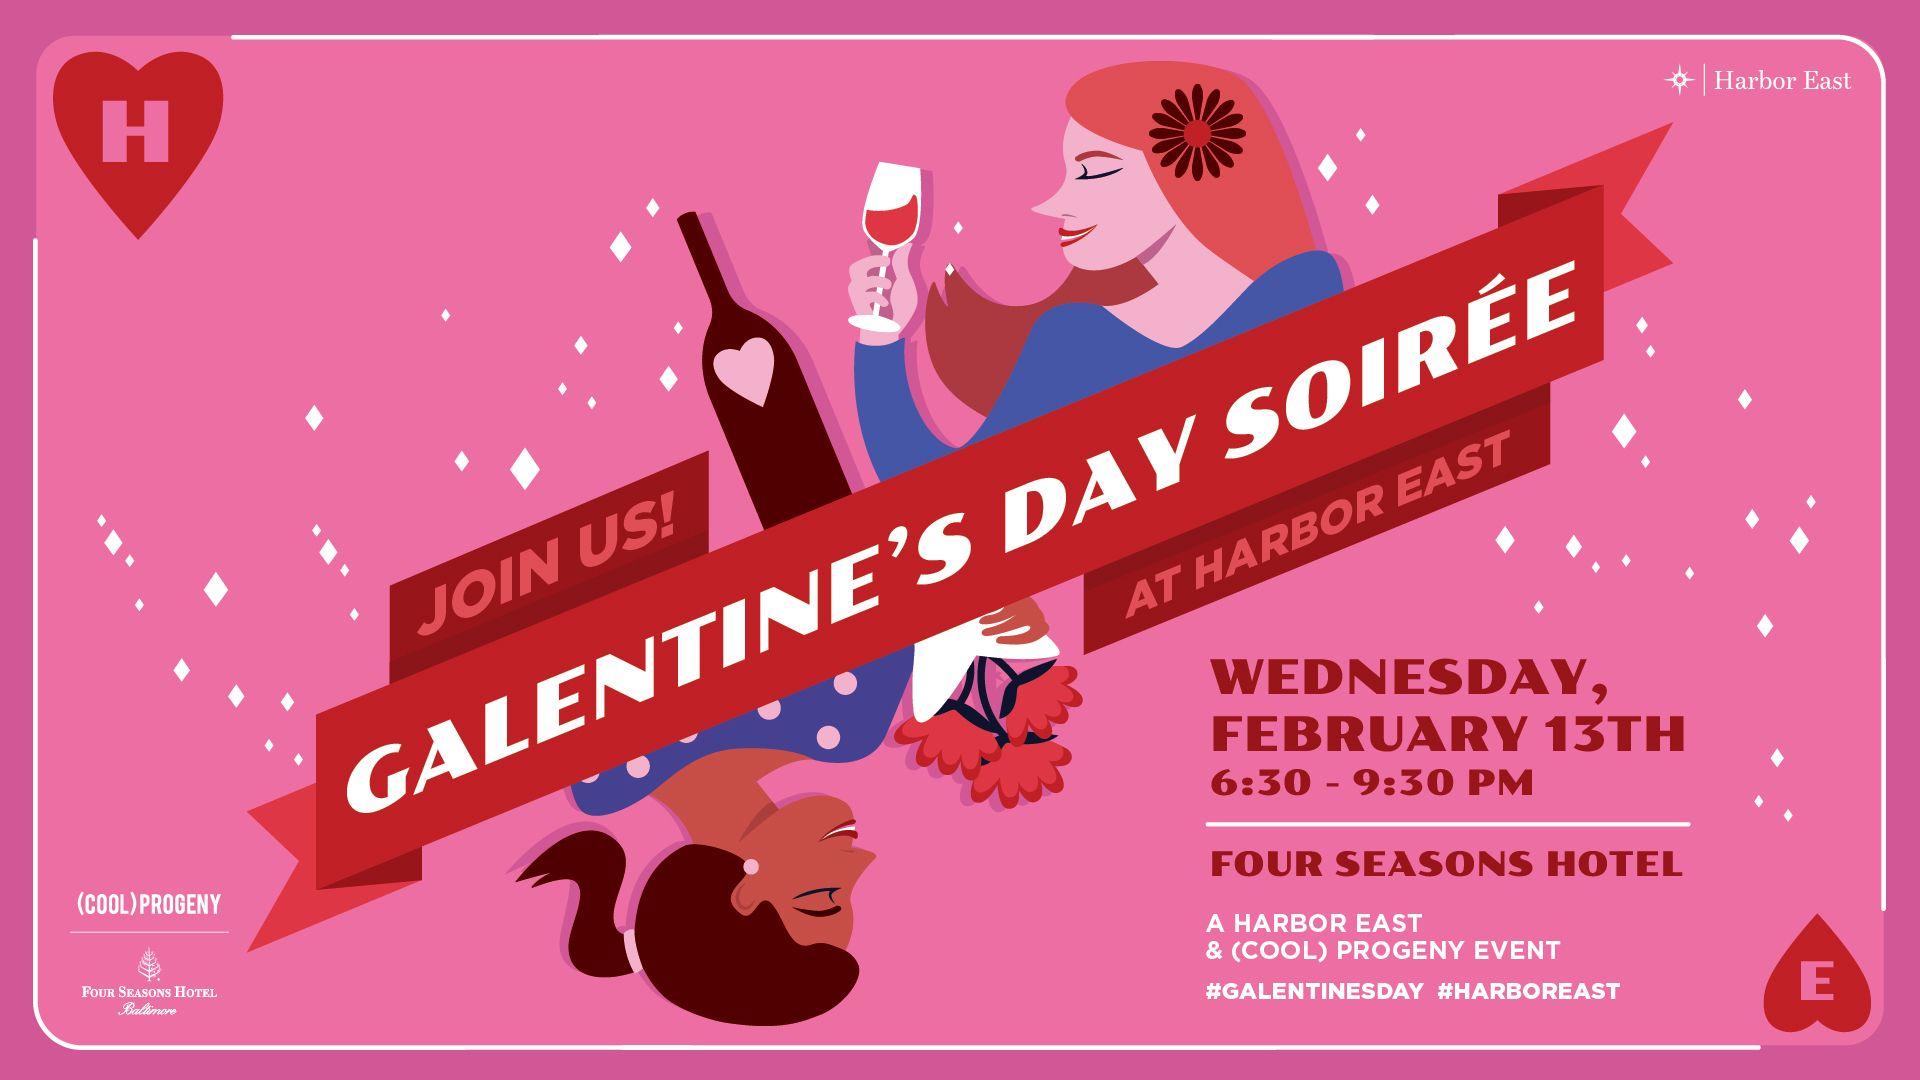 Grab Your Gal Pals! Join Us for the Galentine's Day Soirée at Four